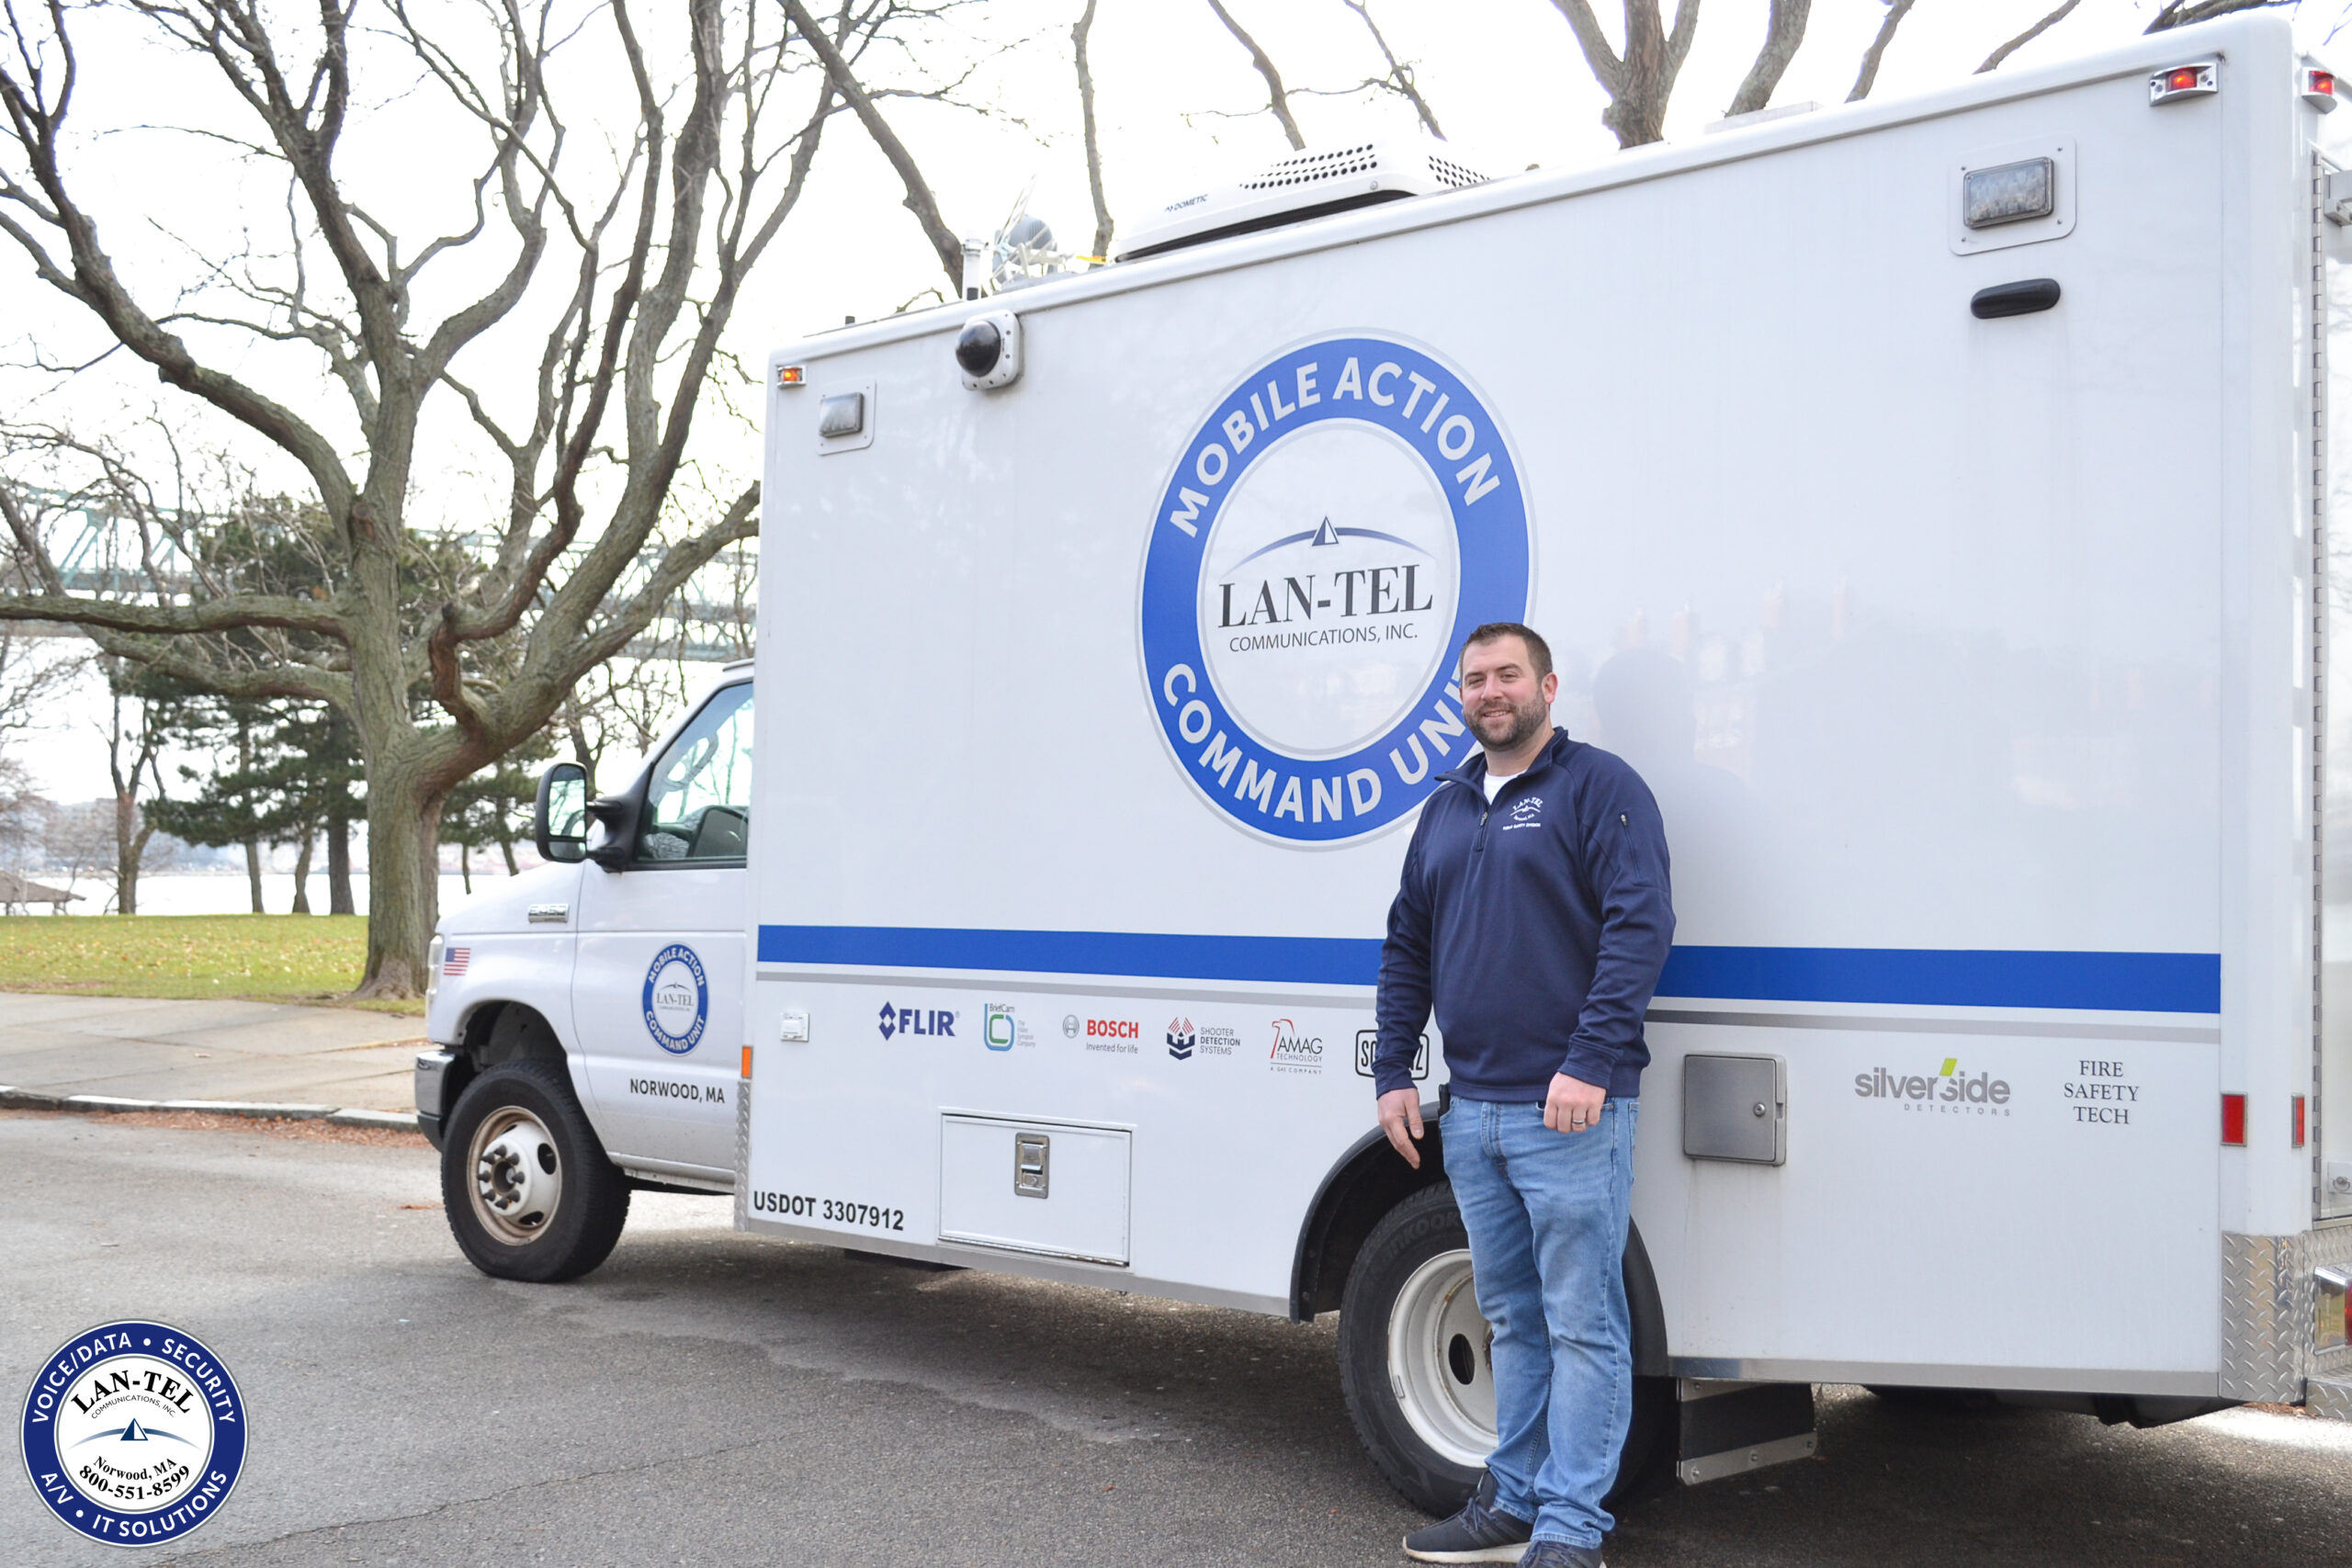 Scott standing with Mobile Command Unit